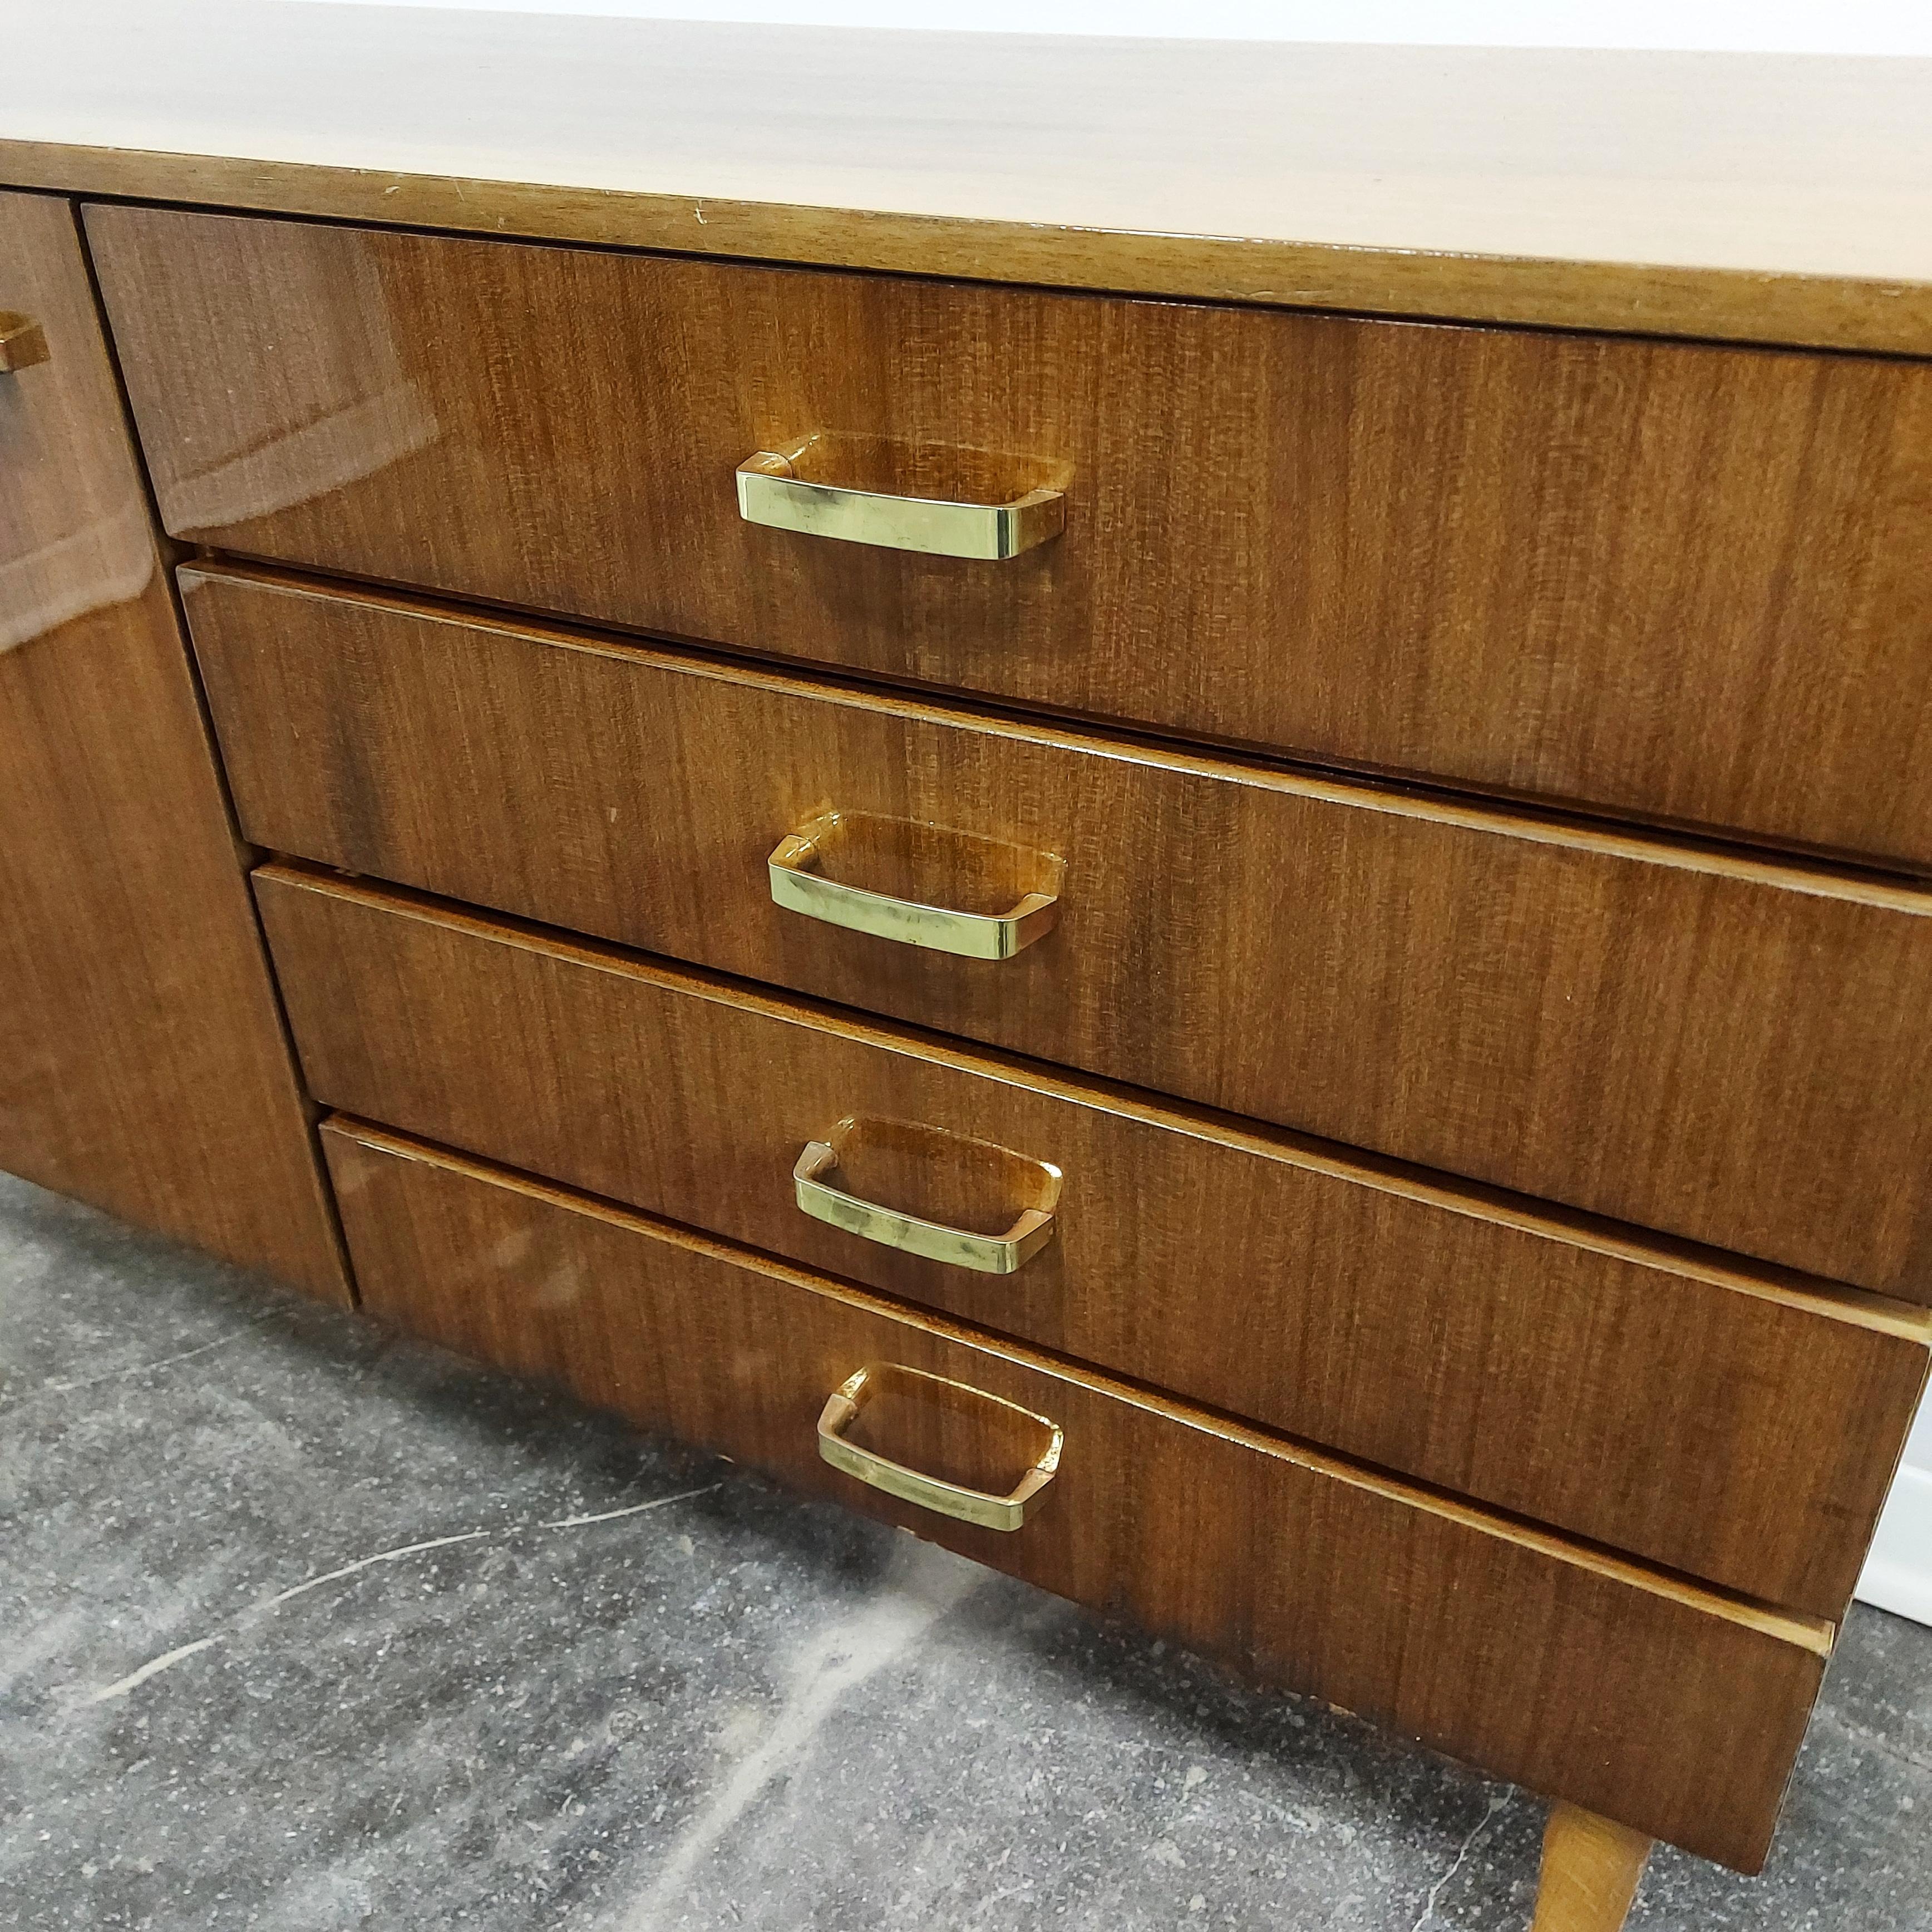 Sideboard 1960s

Produced by MEBLO as a set called Alenka.

Nicely preserved and in great condition with a few scratches.

All main parts from hardwood.